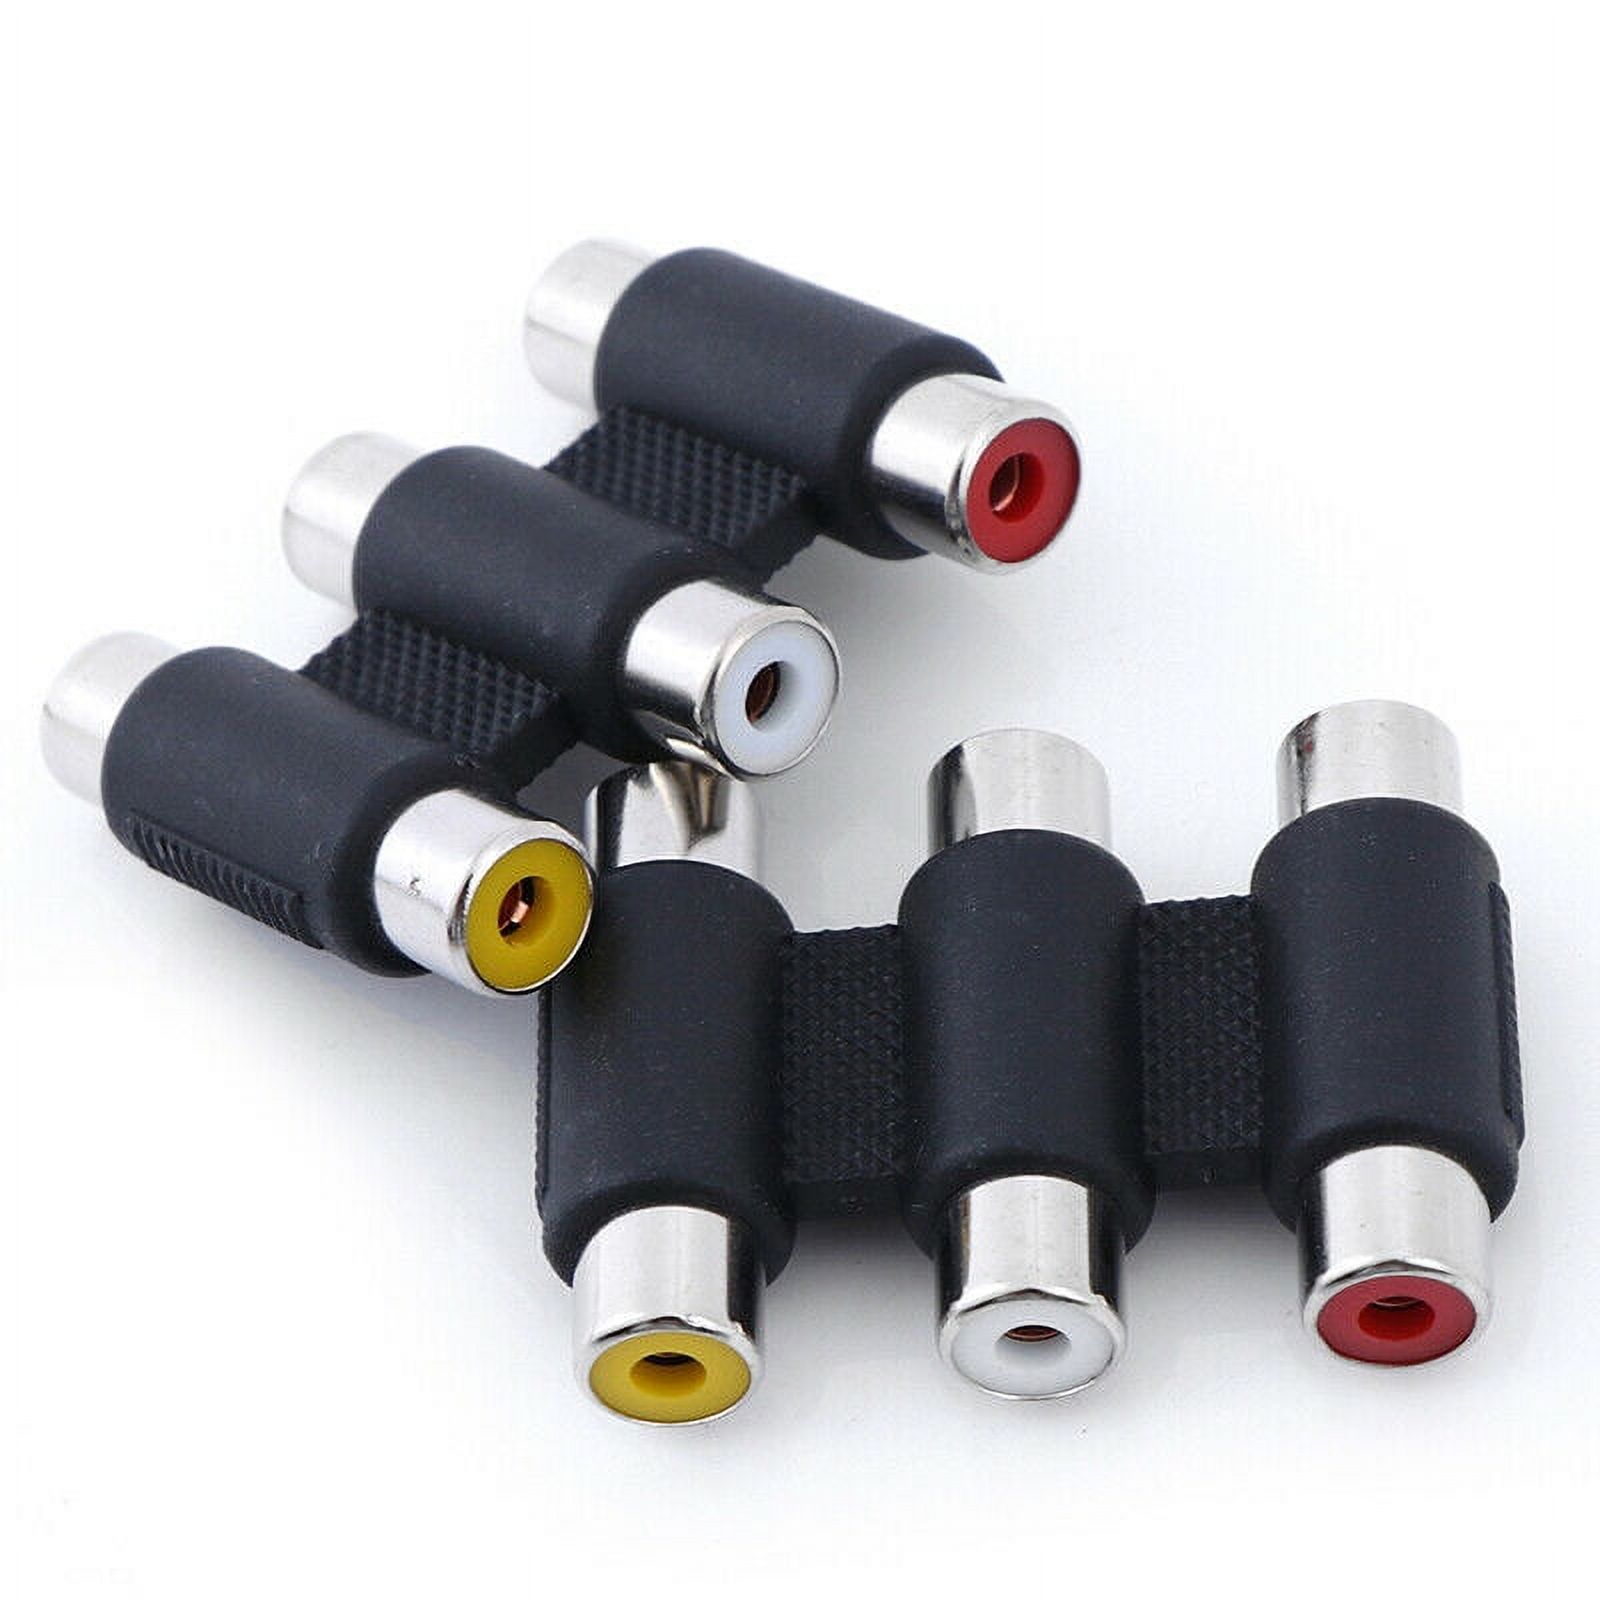 Datingday 1PC 3 RCA AV audio video female to female jack coupler adapter 3RCA connector - image 2 of 4